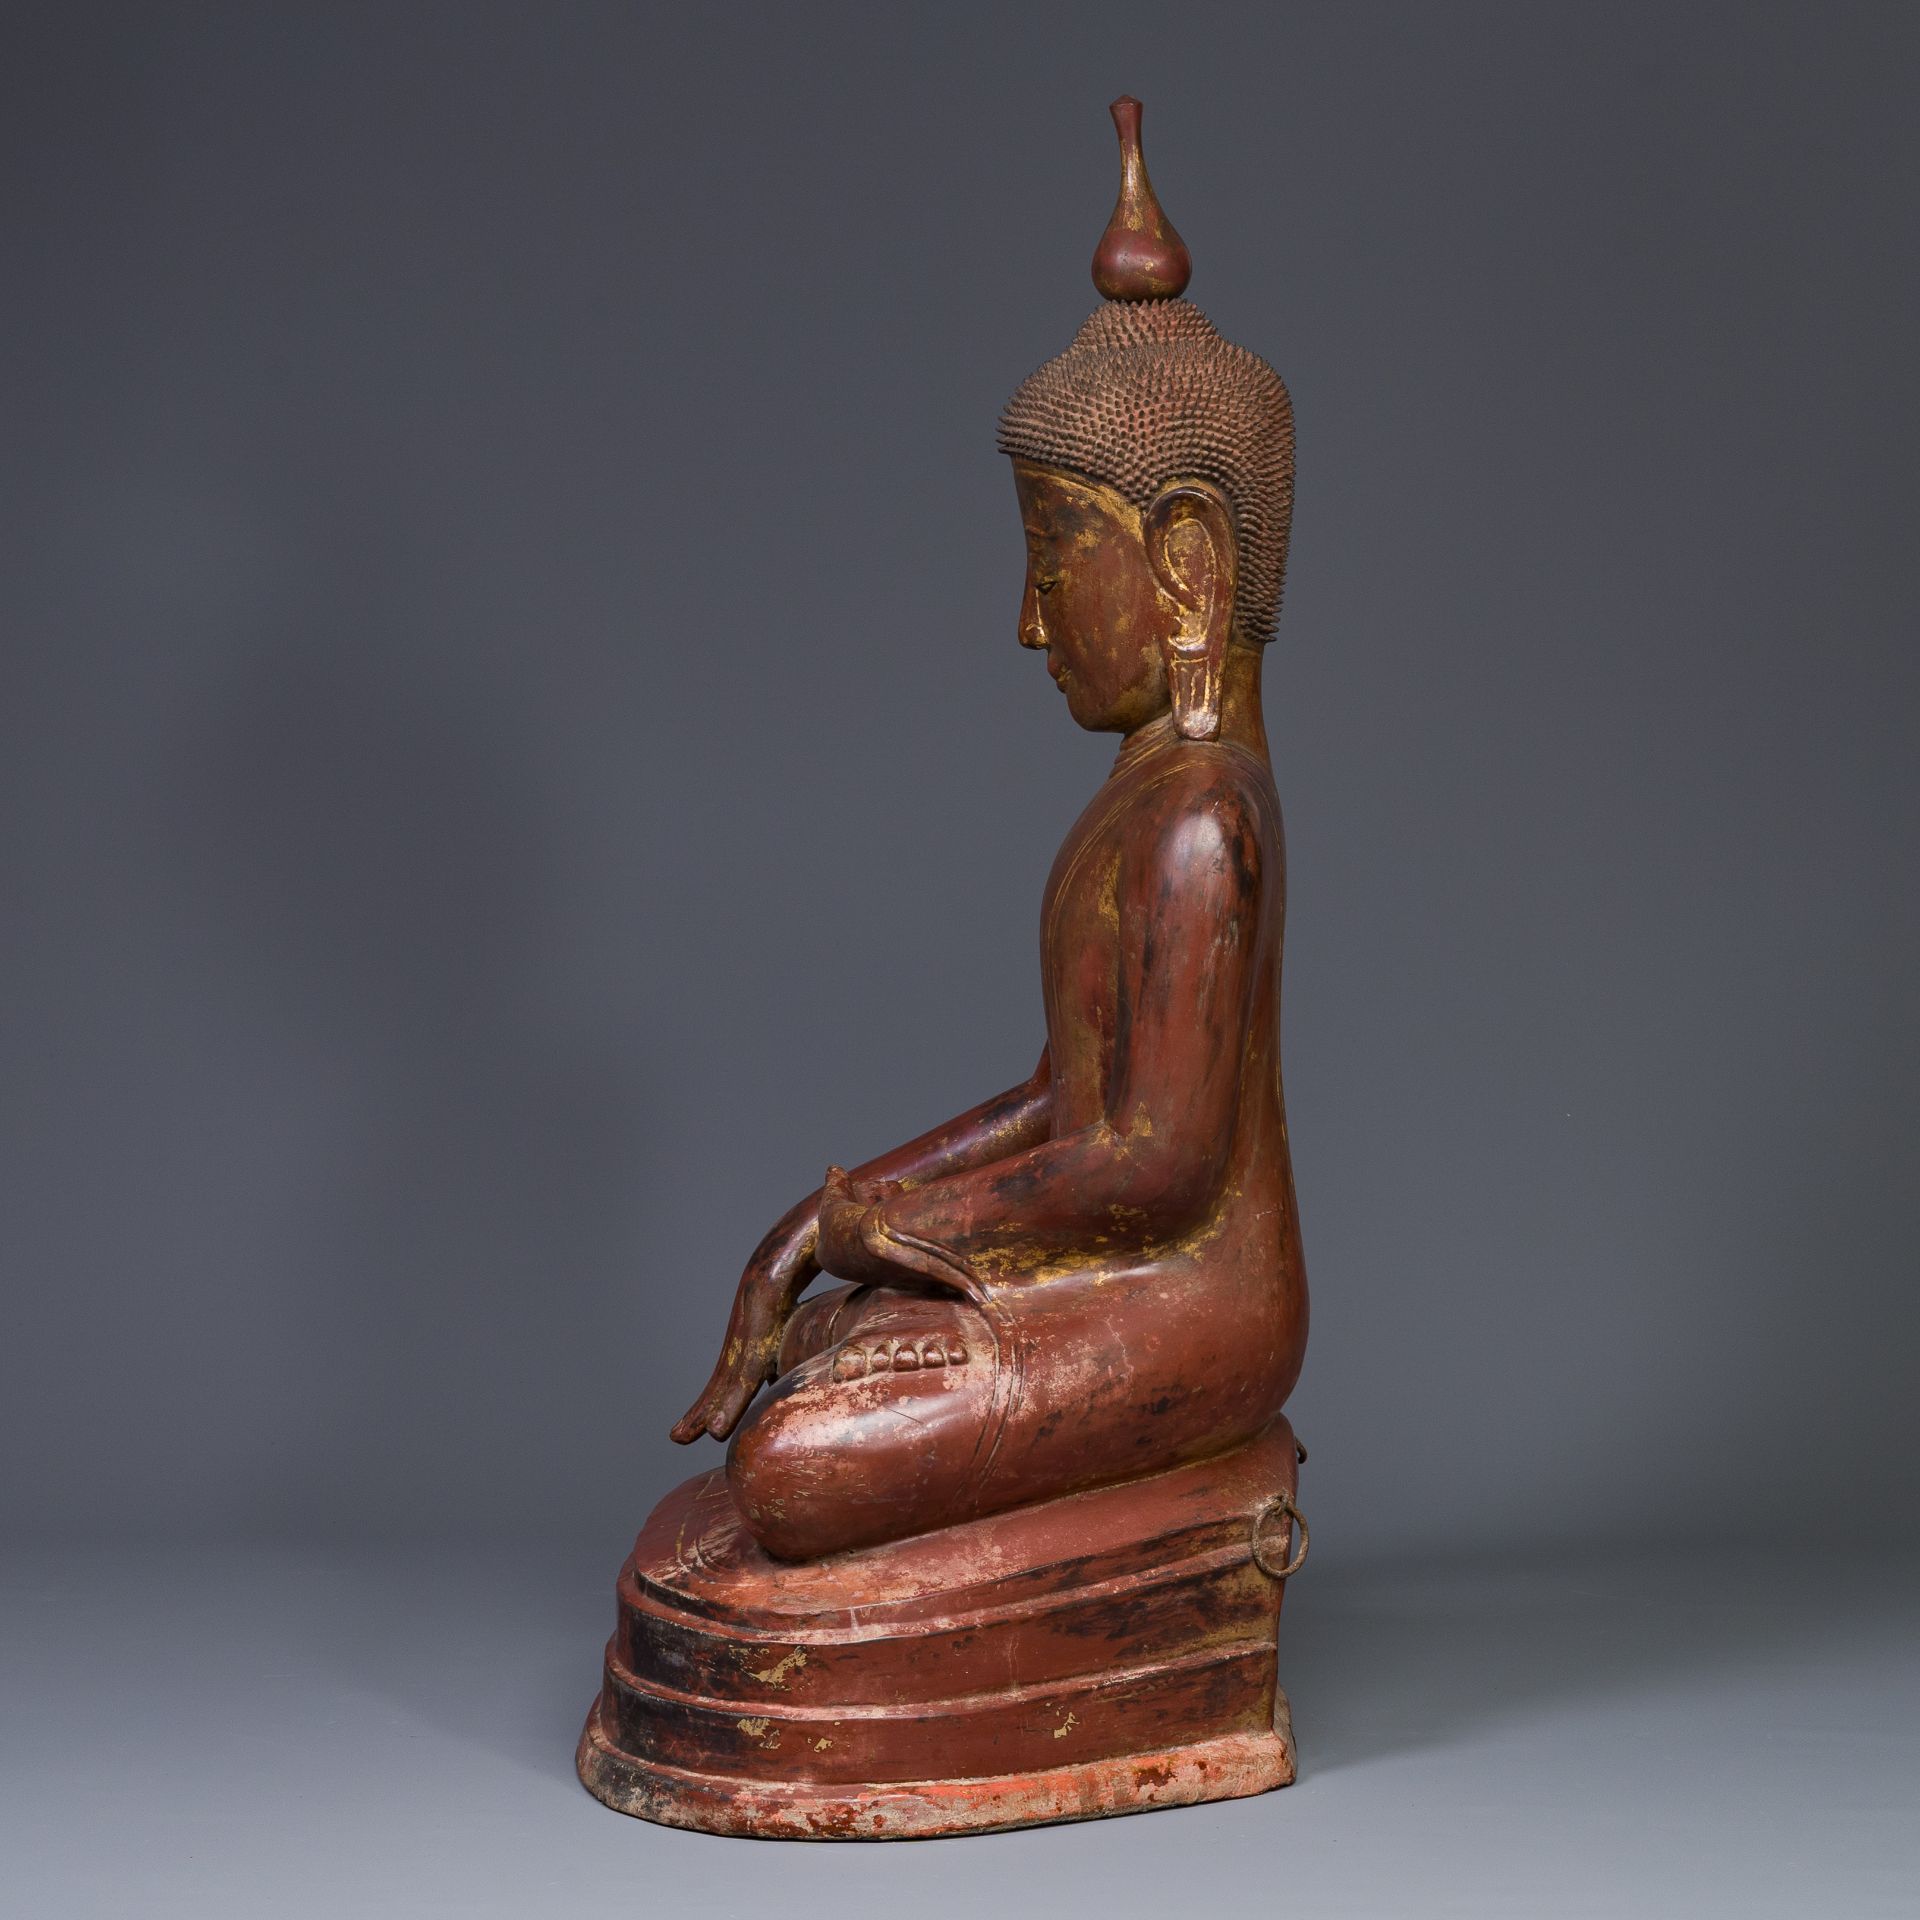 A large Burmese gilded lacquer Buddha in bhumisparsha mudra, 19/20th C. - Image 11 of 18